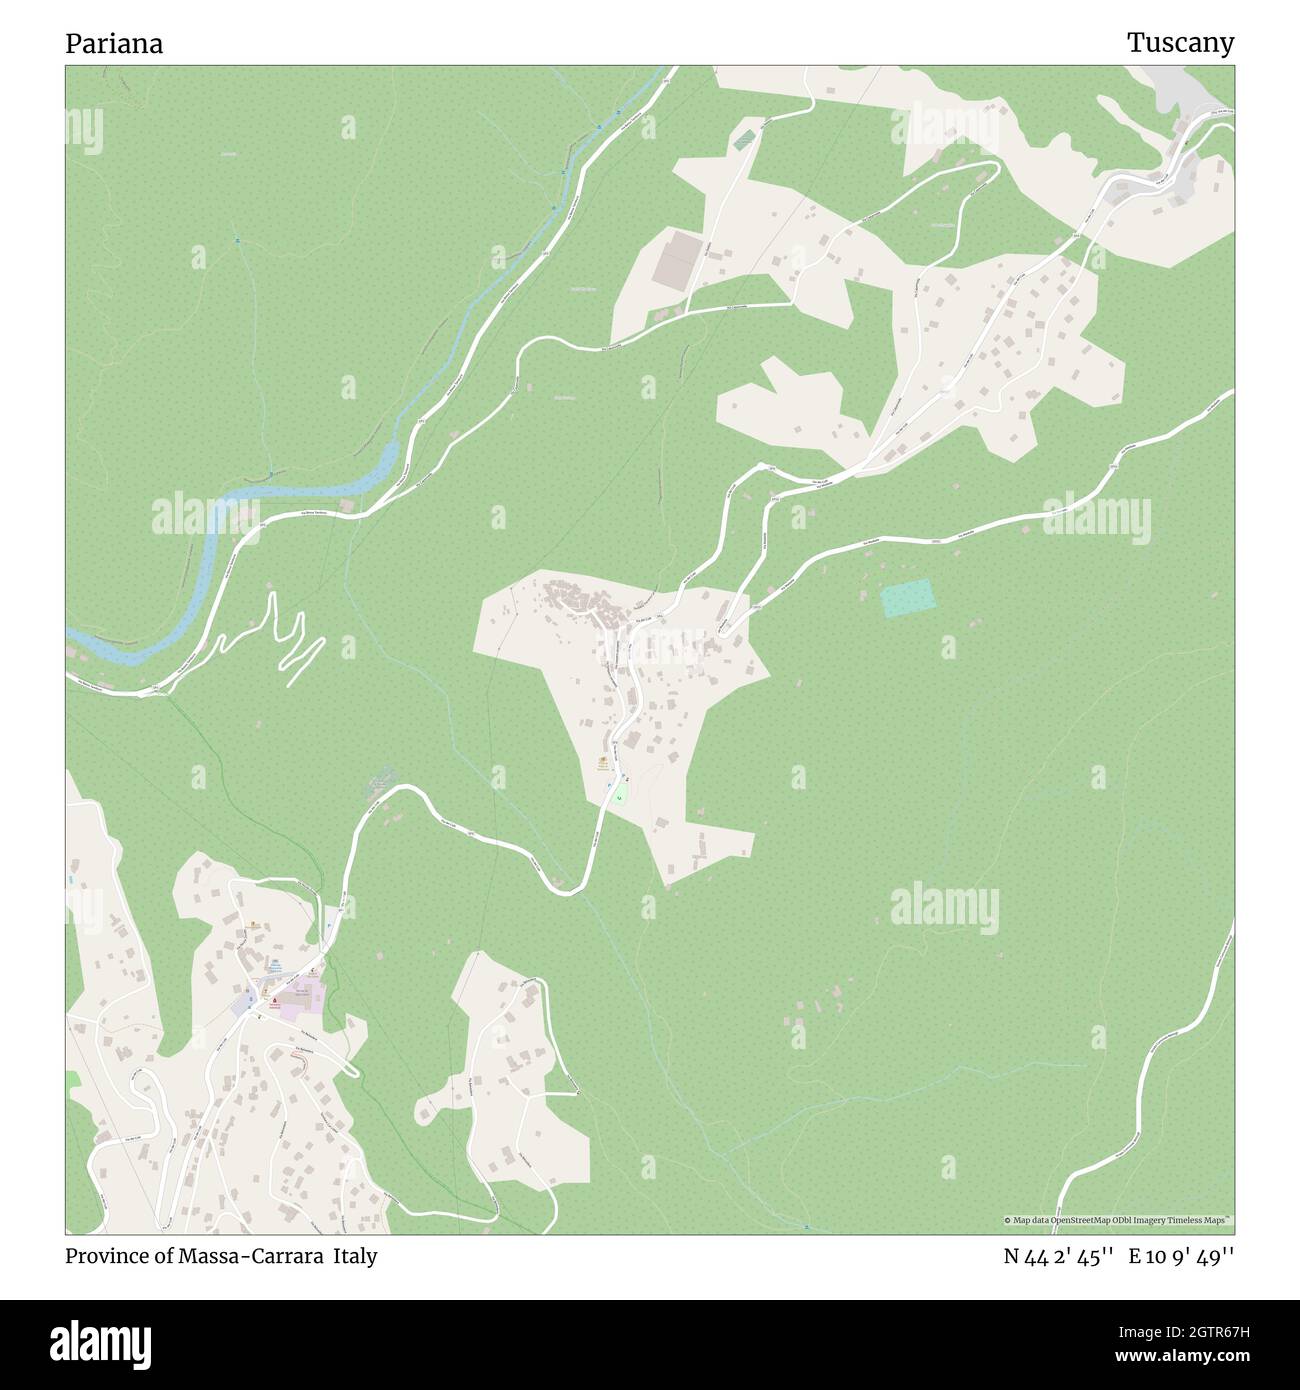 Pariana, Province of Massa-Carrara, Italy, Tuscany, N 44 2' 45'', E 10 9' 49'', map, Timeless Map published in 2021. Travelers, explorers and adventurers like Florence Nightingale, David Livingstone, Ernest Shackleton, Lewis and Clark and Sherlock Holmes relied on maps to plan travels to the world's most remote corners, Timeless Maps is mapping most locations on the globe, showing the achievement of great dreams Stock Photo